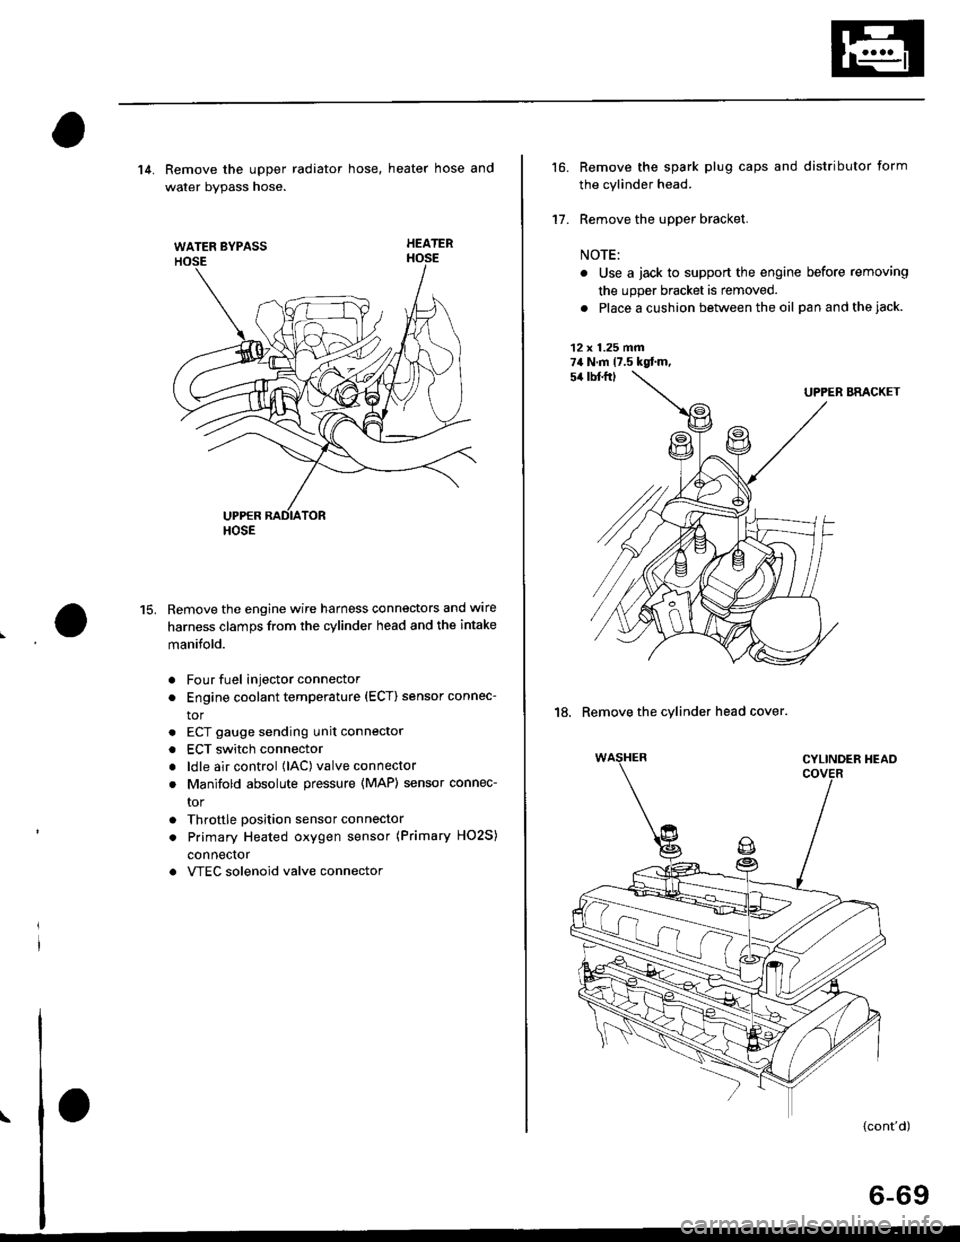 HONDA CIVIC 1996 6.G Workshop Manual WATER BYPASS
HOSE
14. Remove the upper radiator hose, heater hose and
water bvpass hose.
HEATER
Remove the engine wire harness connectors and wlre
harness clamps from the cylinder head and the intake
